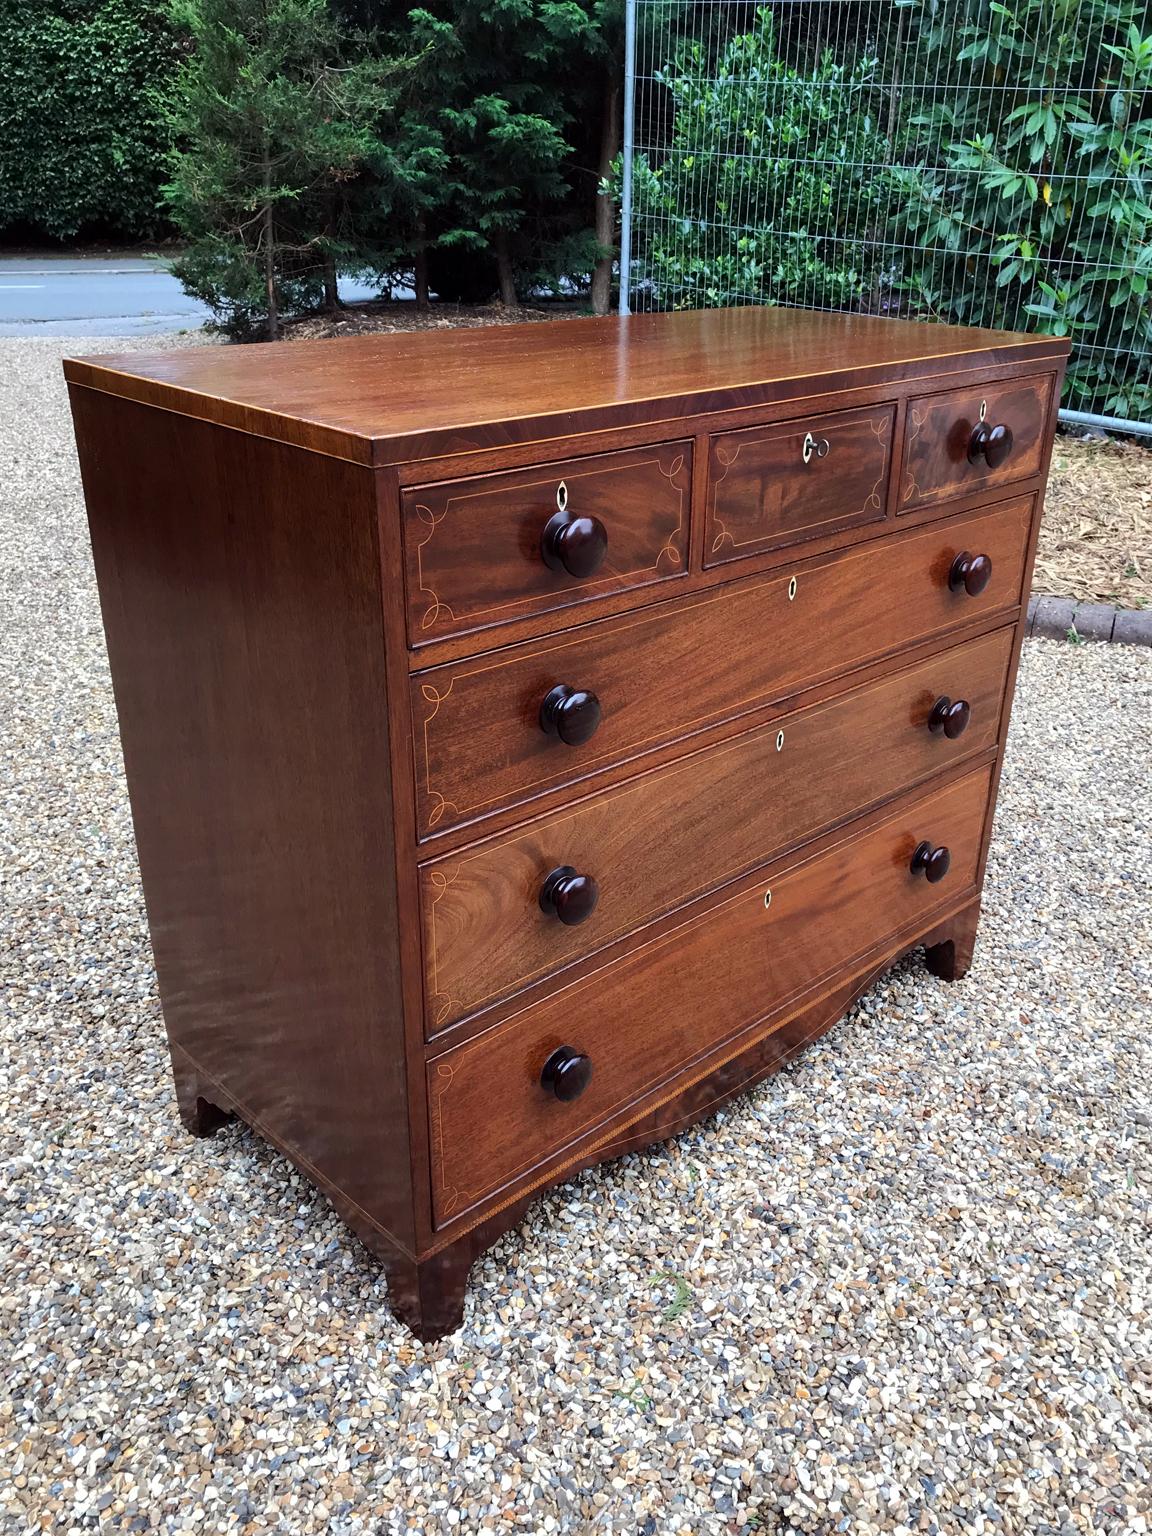 A very high quality, 19th century George IV – Regency mahogany inlaid chest of drawers with three short and three graduated long oak lined drawers with wooden turned bun handles and ivory escutcheons, on bracket feet,

circa